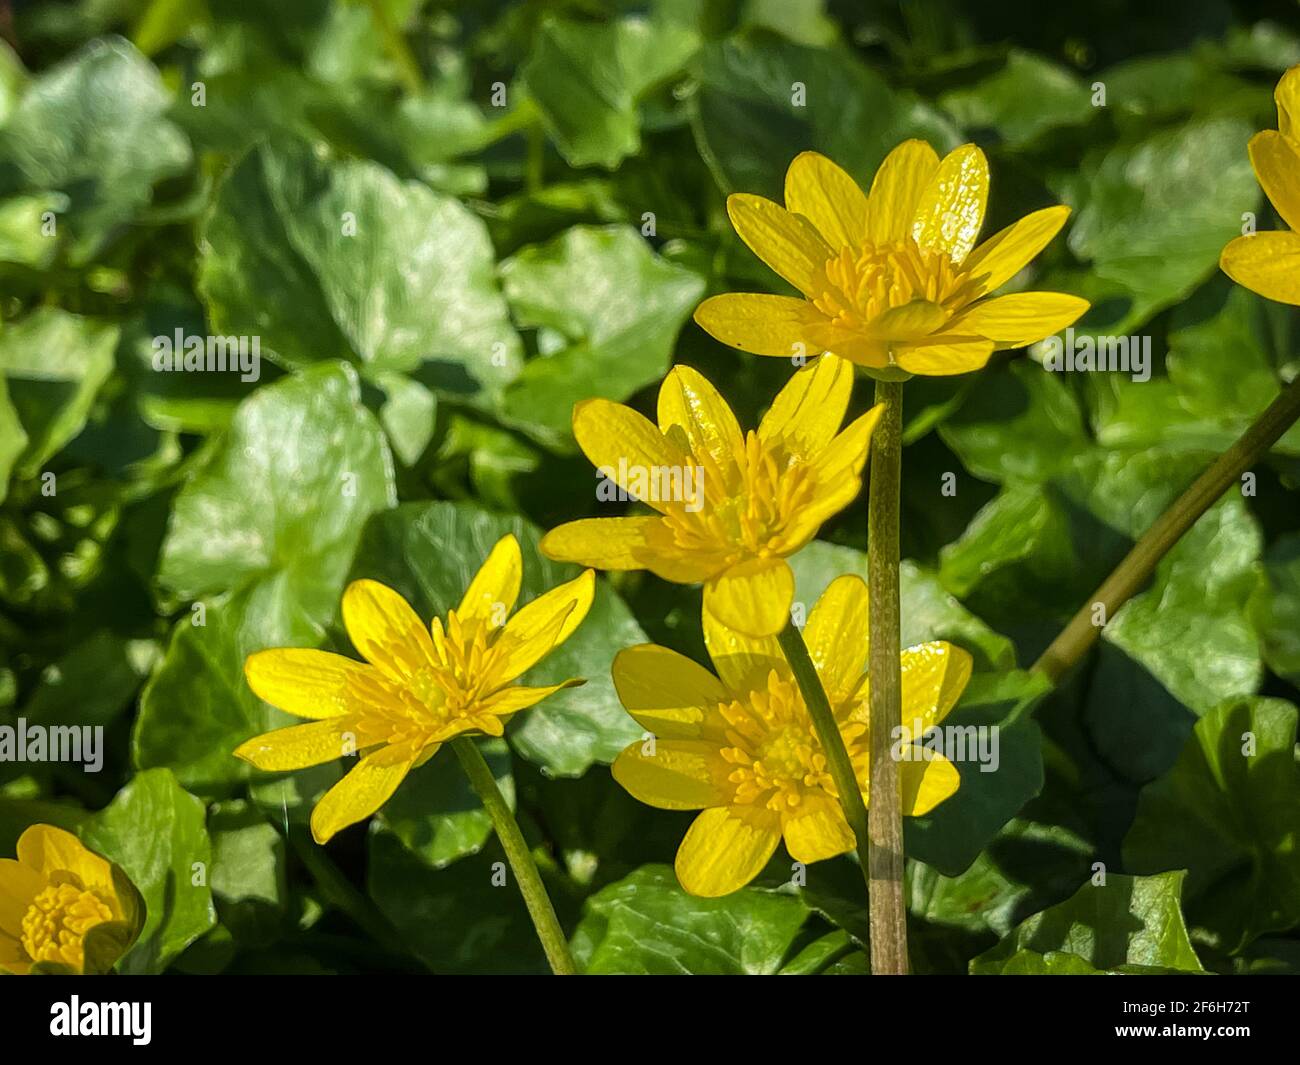 Ficaria verna wild flower also known as Lesser Celandine, pilewort or fig buttercup Stock Photo